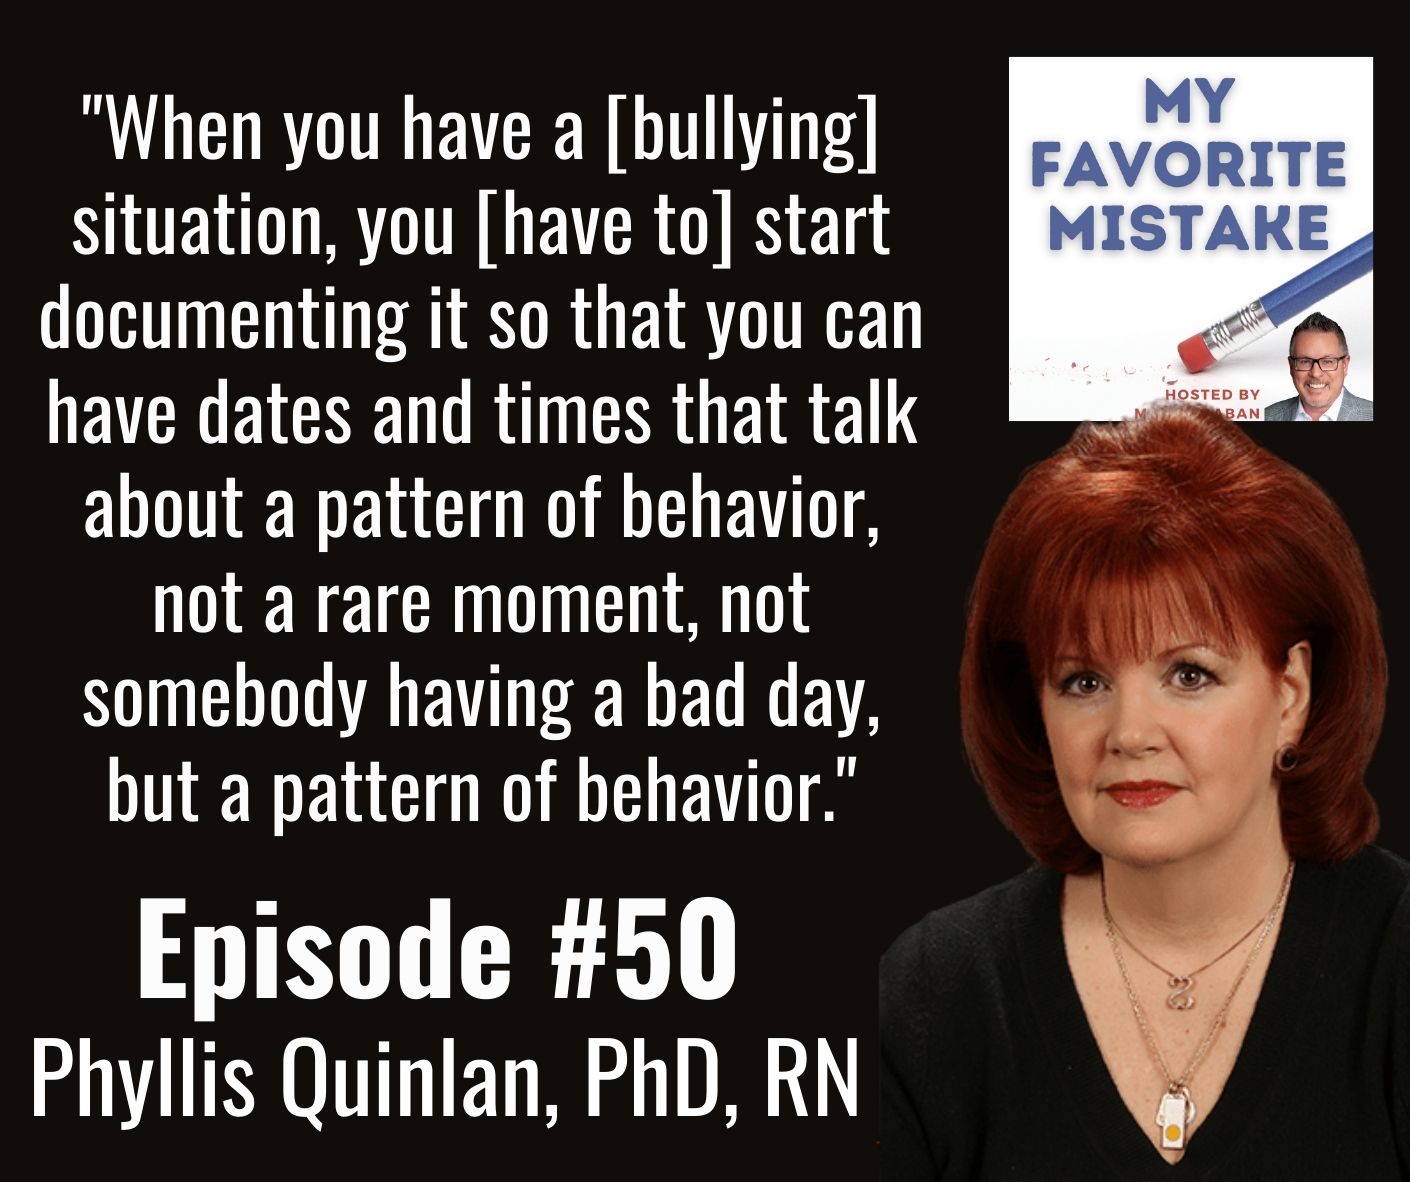 "When you have a [bullying] situation, you [have to] start documenting it so that you can have dates and times that talk about a pattern of behavior, not a rare moment, not somebody having a bad day, but a pattern of behavior."